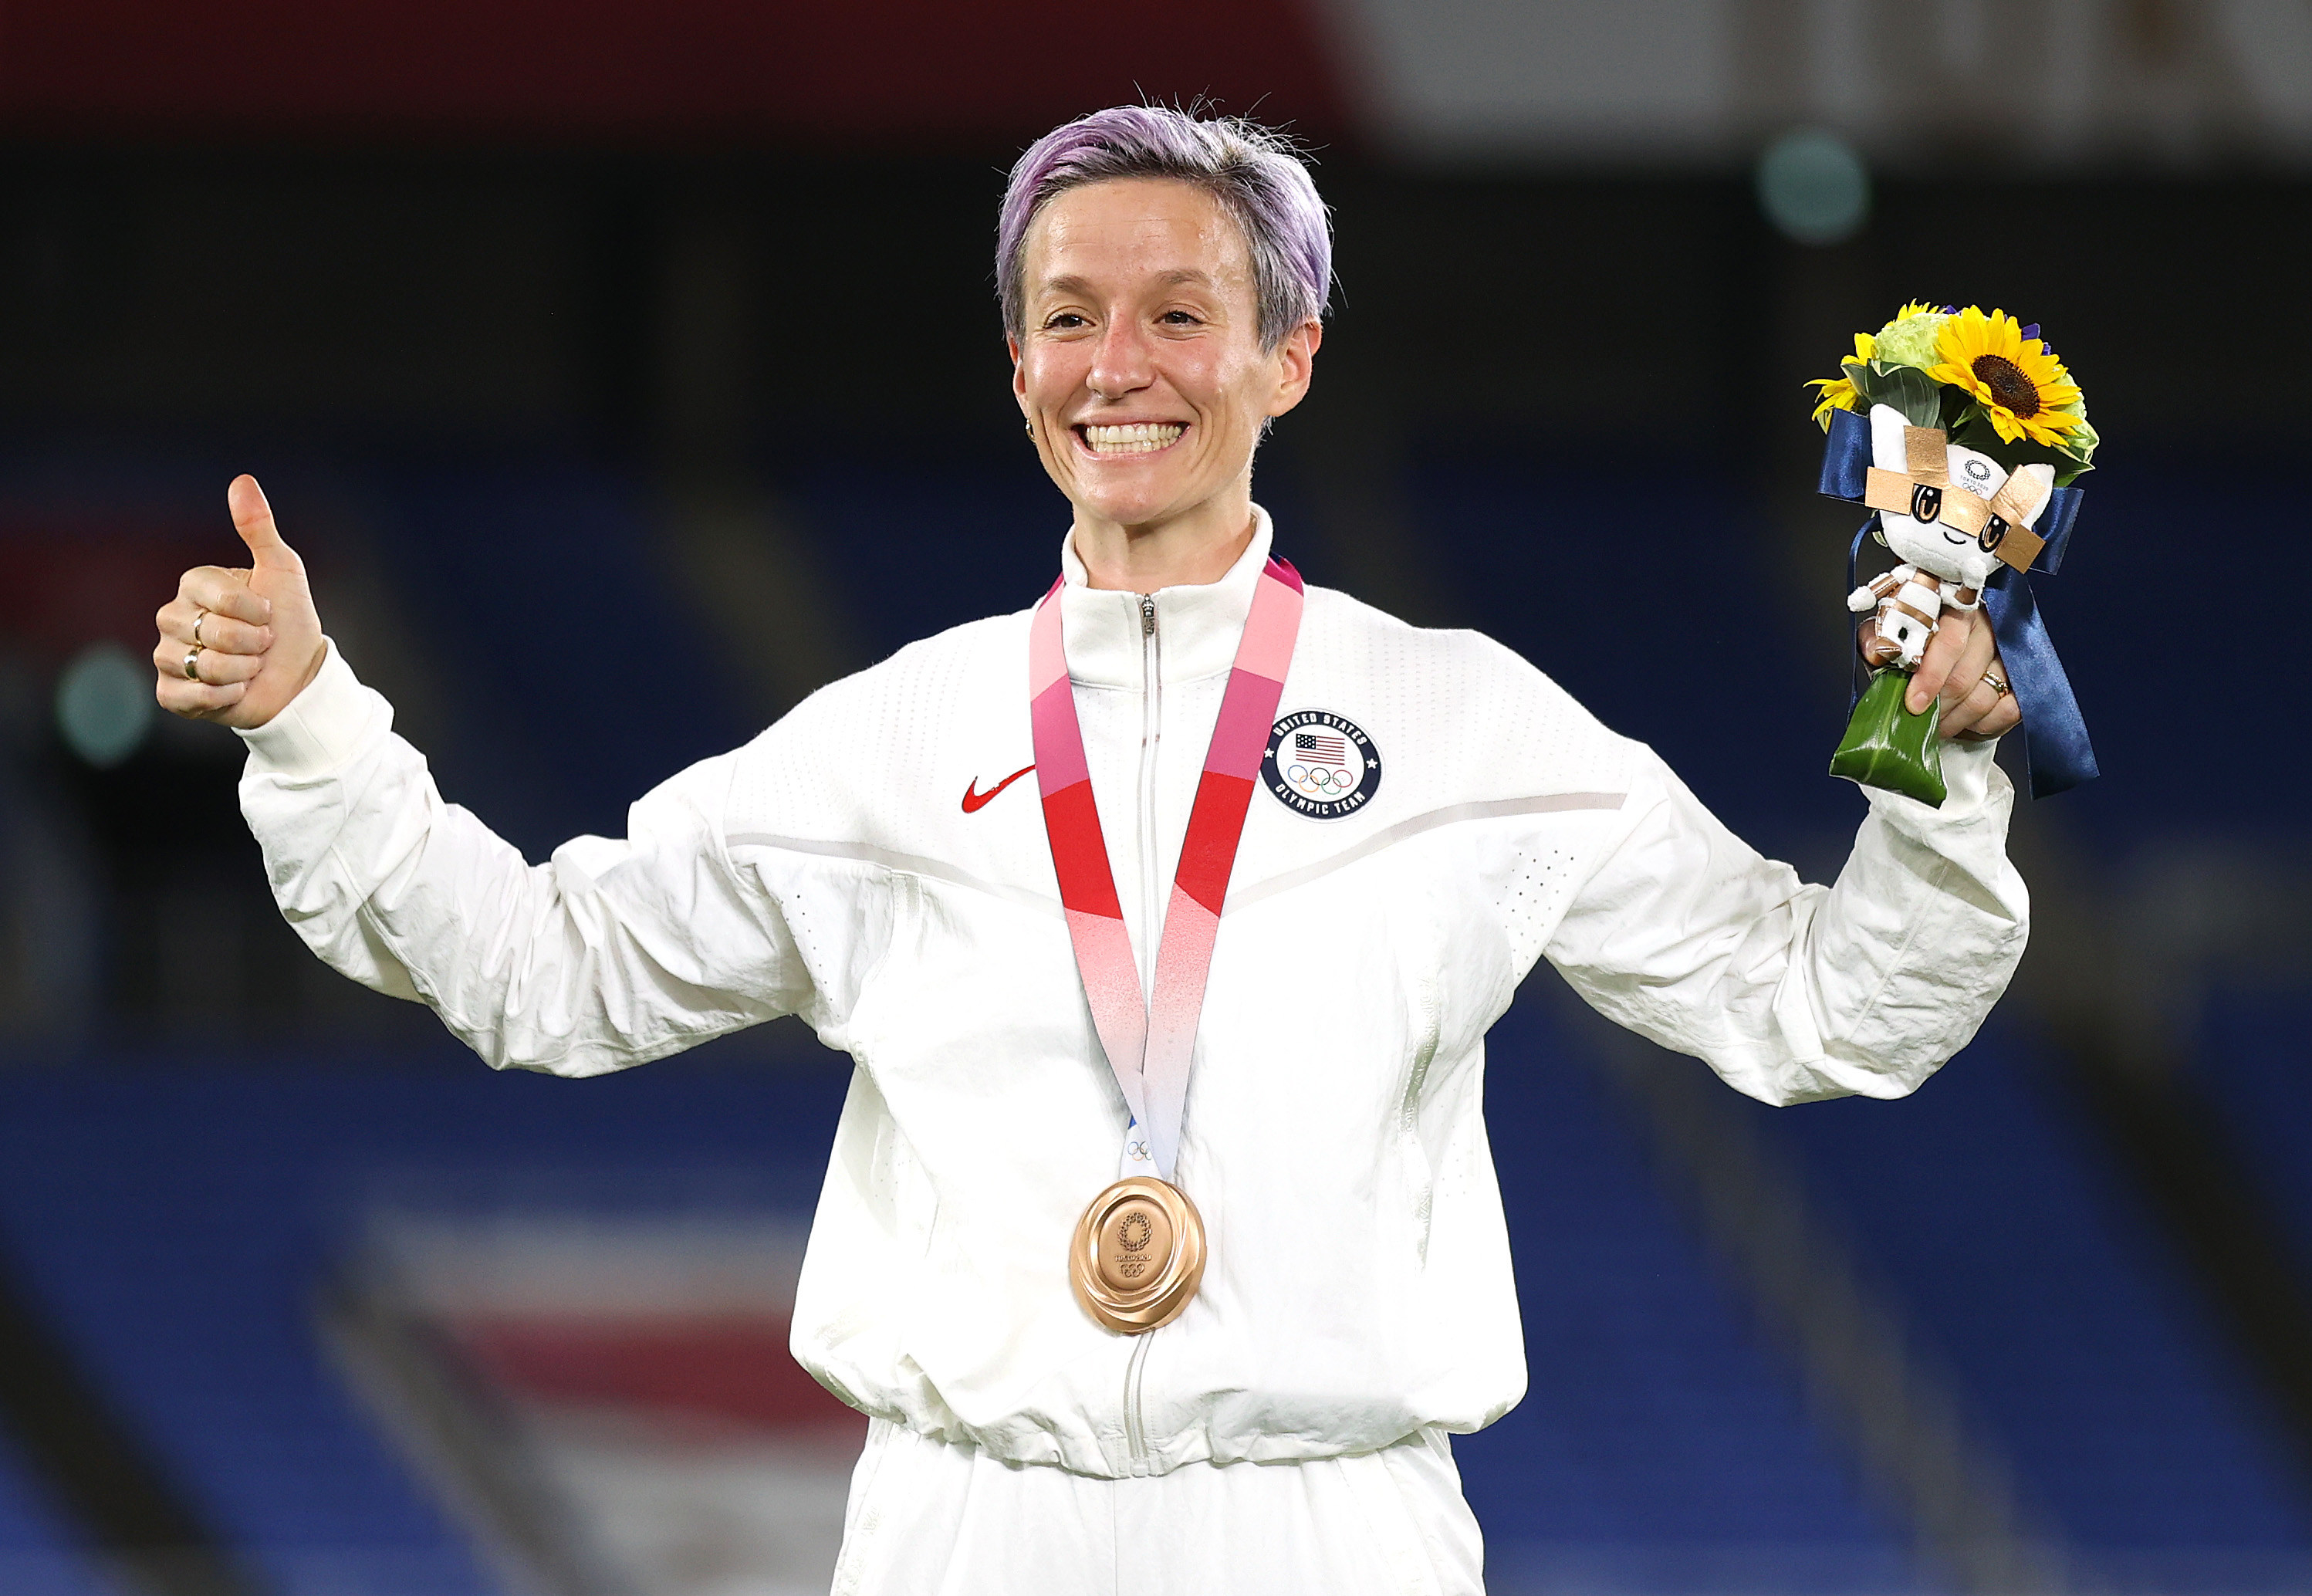 Megan Rapinoe gives a thumbs up as she wears a medal around her neck